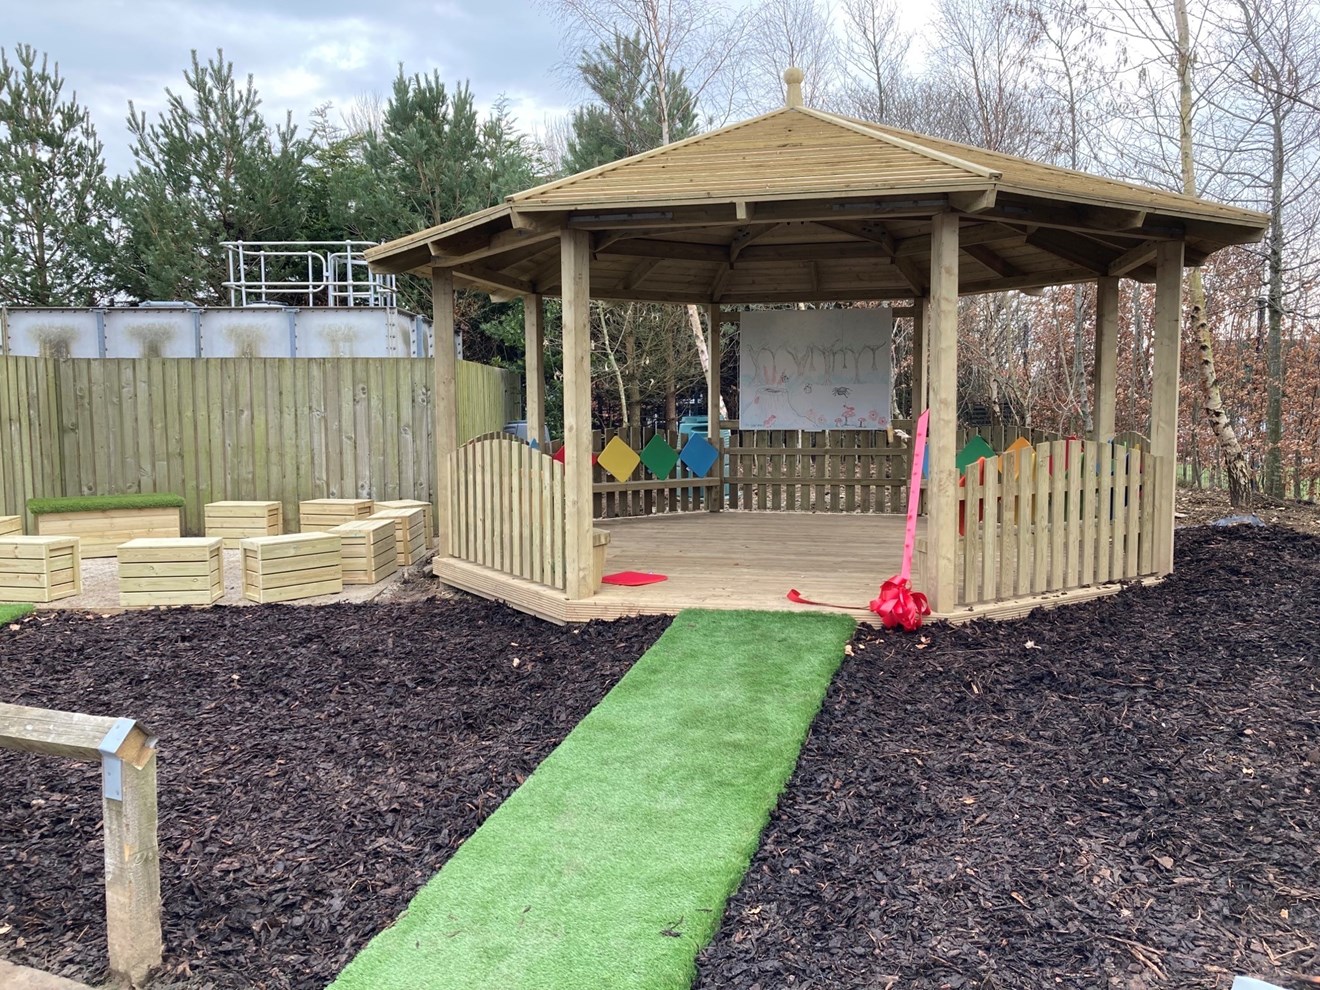 New outdoor STEM classroom opened for children in Carstairs Junction: outdoor classroom 2